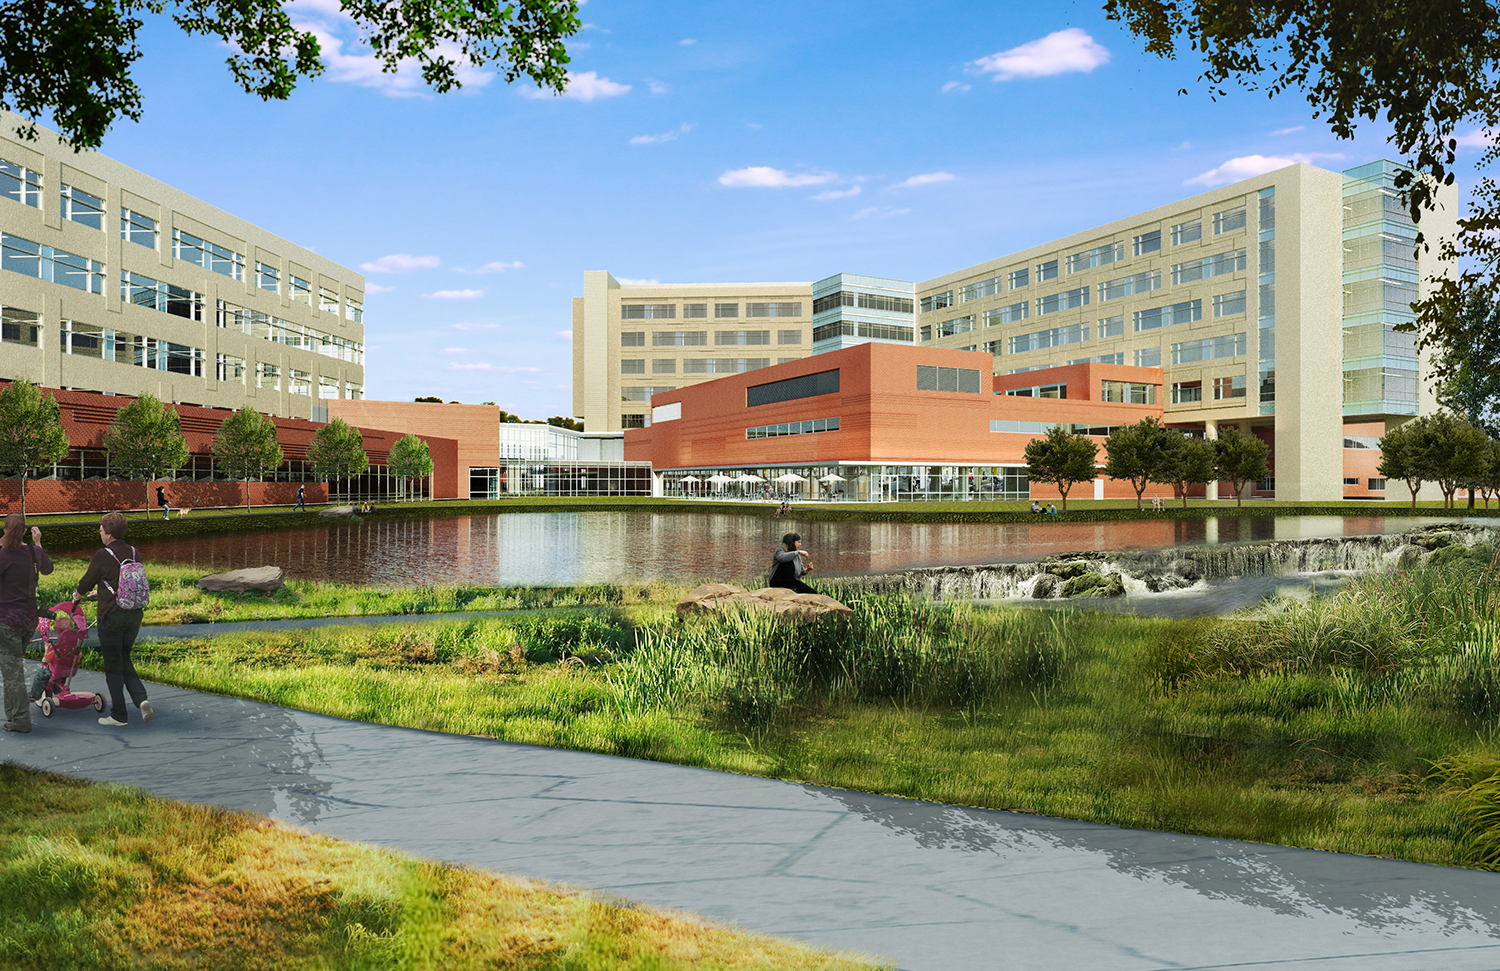  New Medical Office Building and Campus Environment Rendering Courtesy of Gresham Smith 